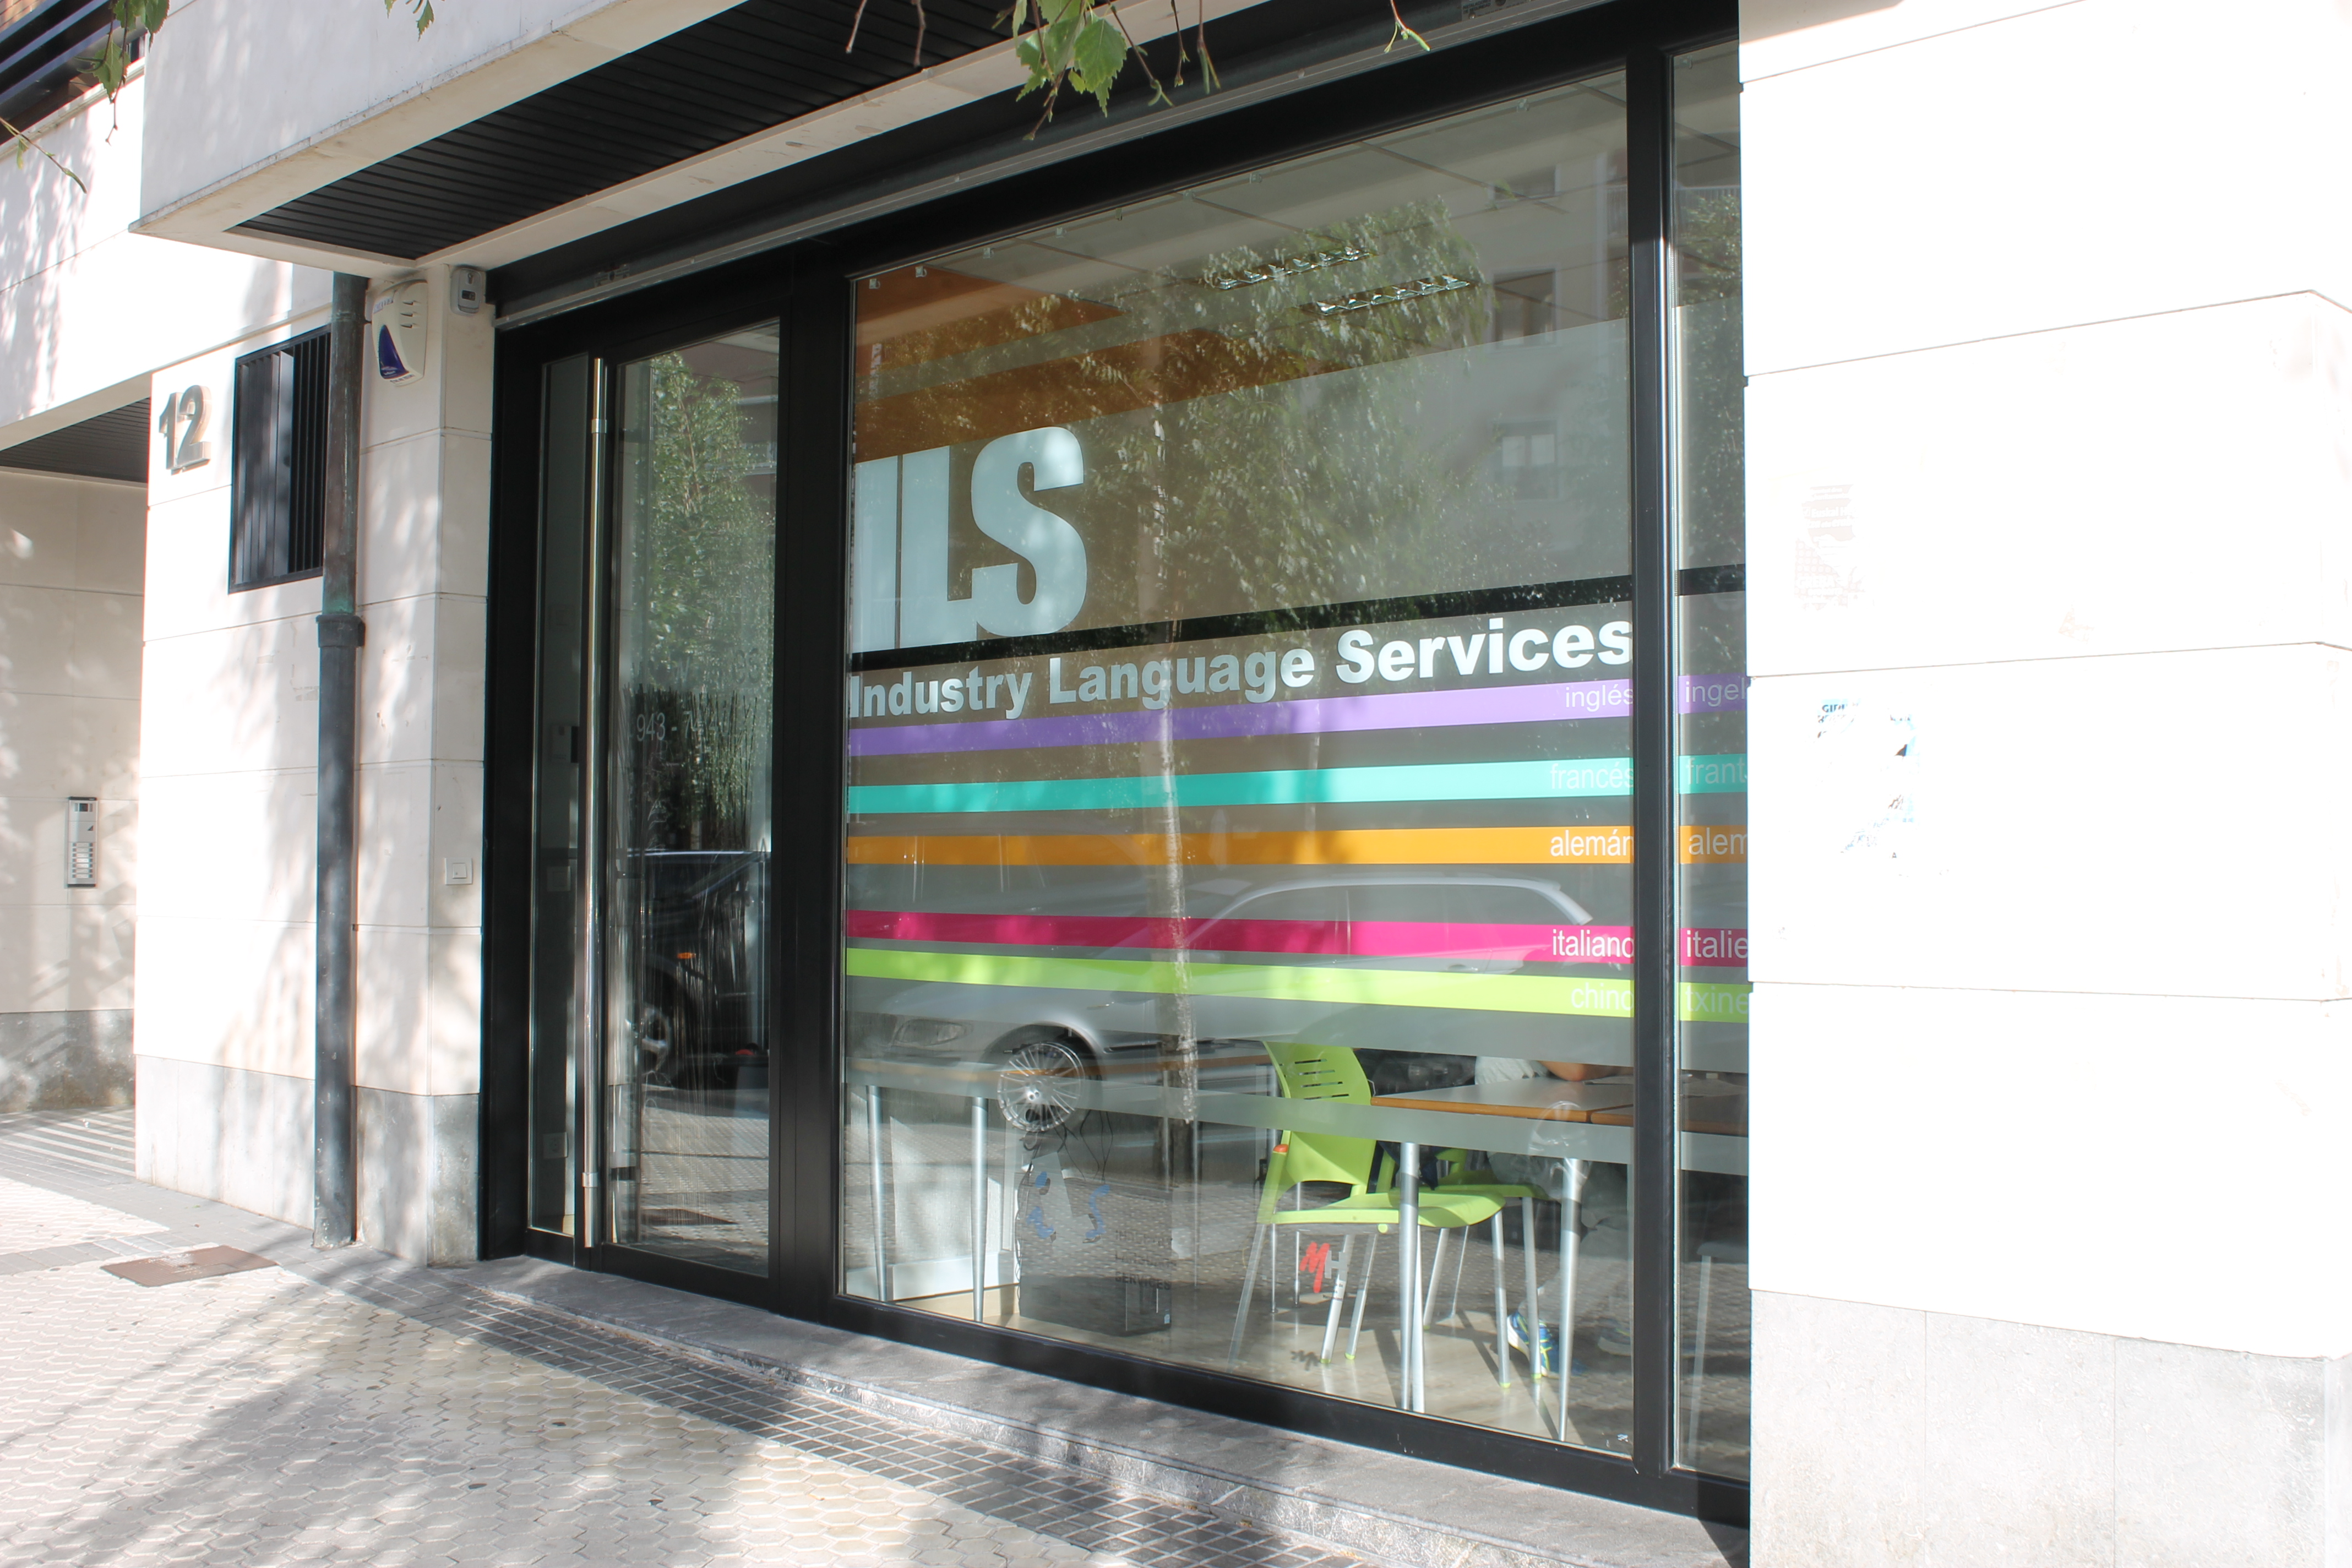 Images ILS- Industry Language Services